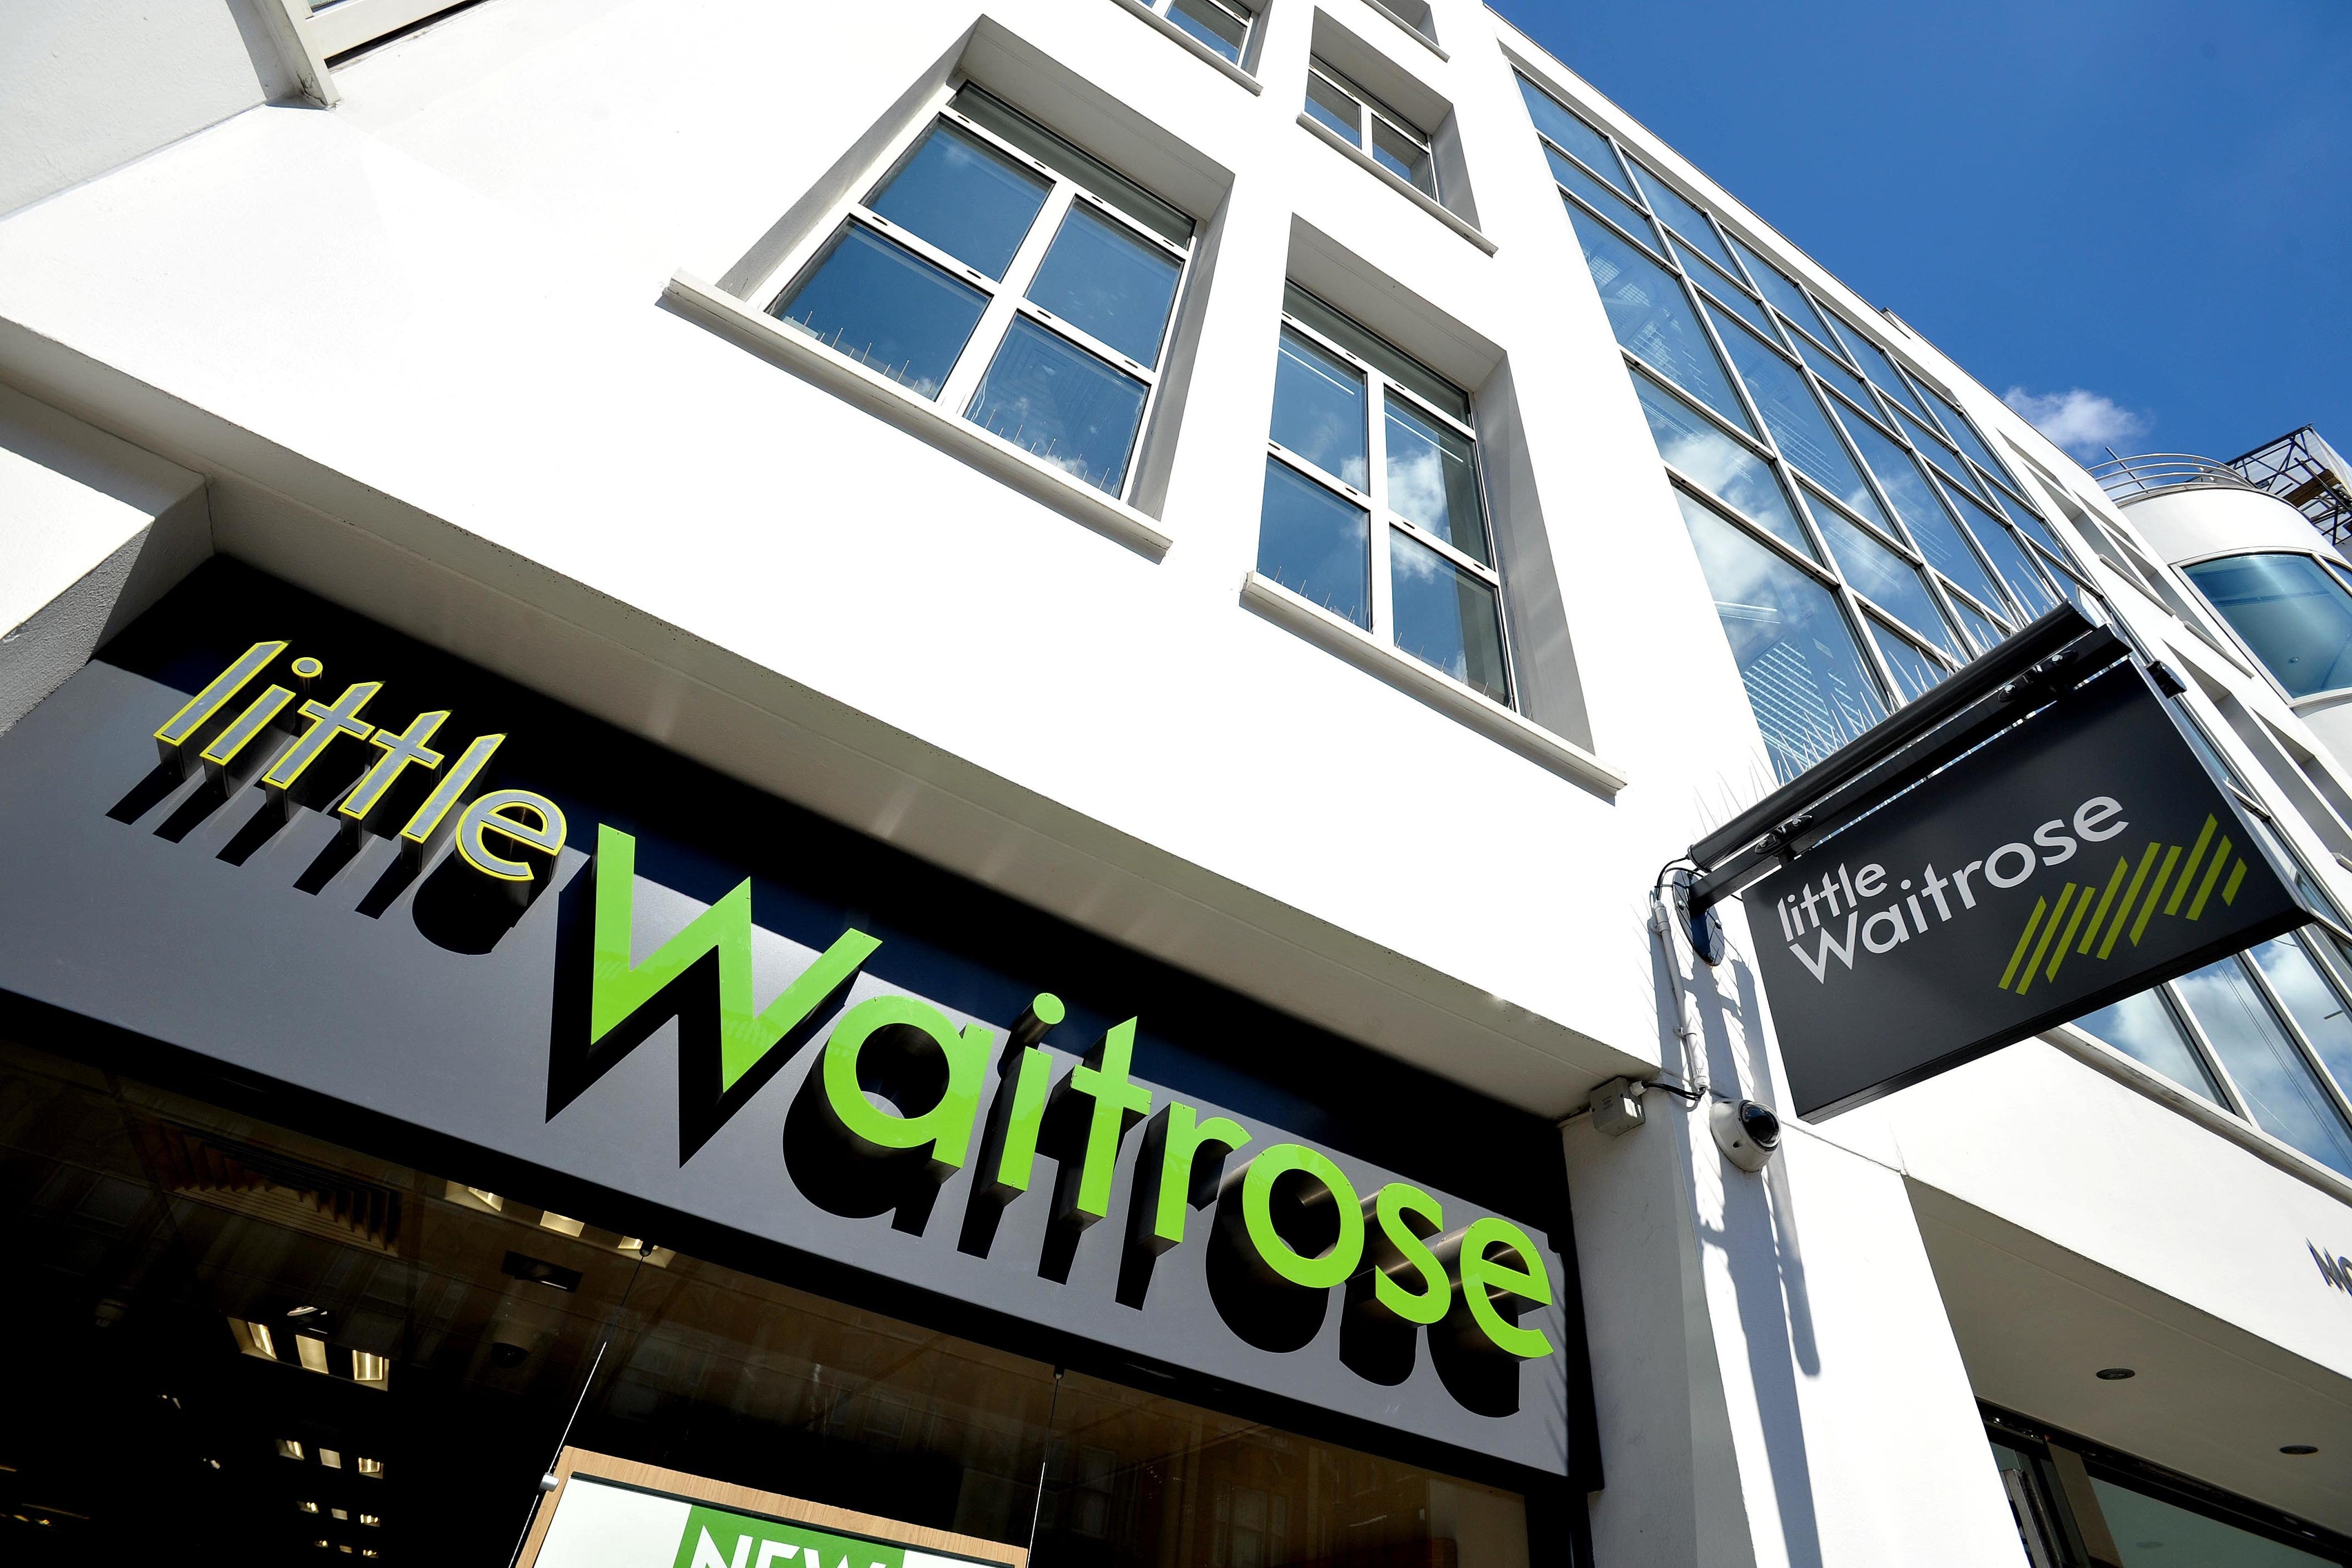 Supermarket struggler: But are there signs of life at Waitrose?